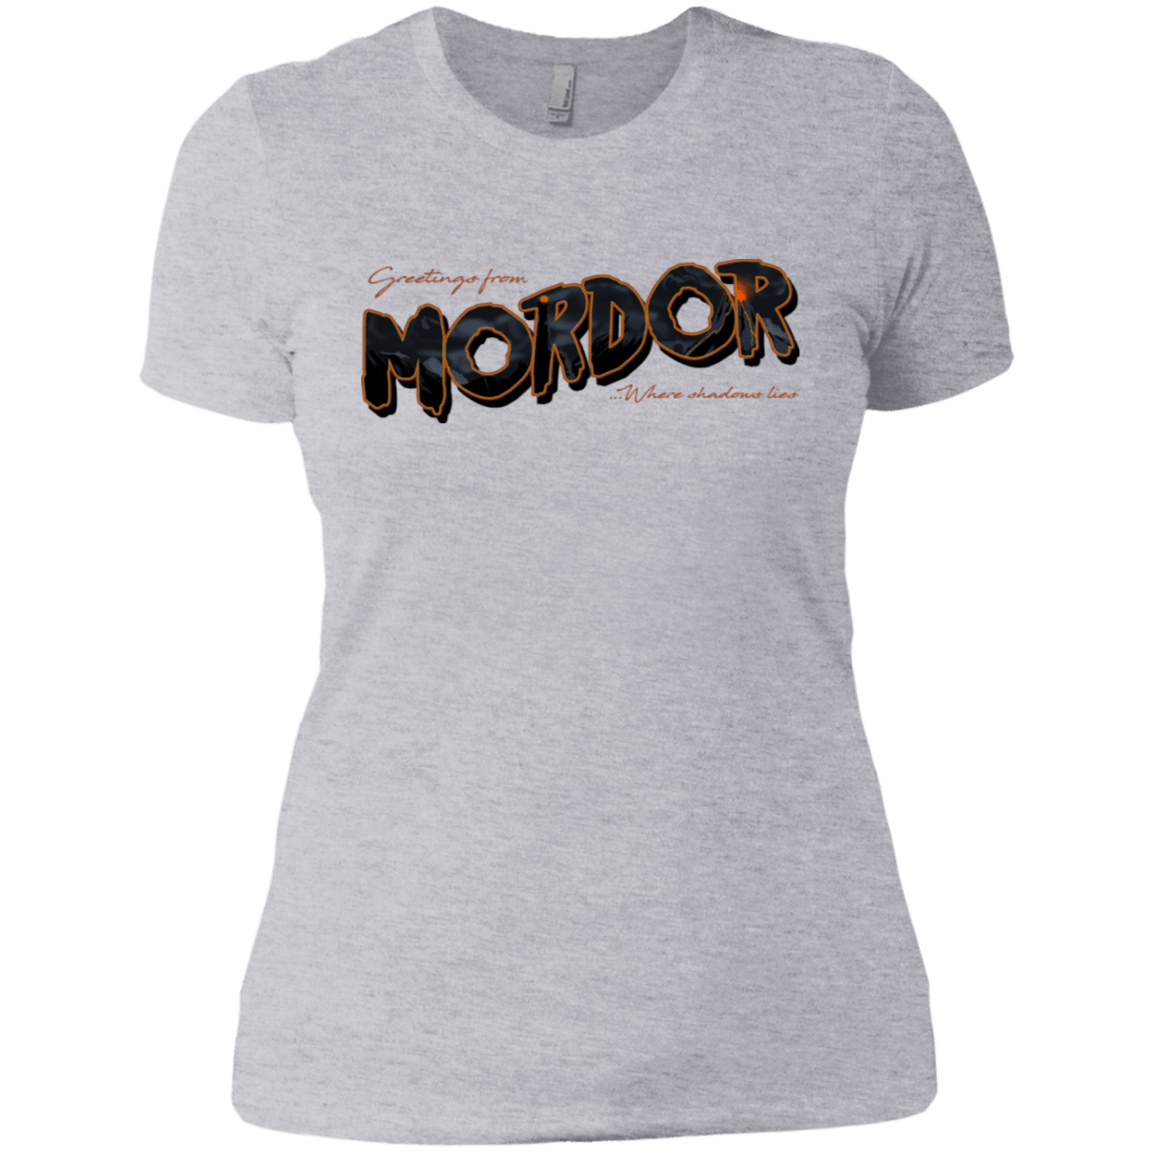 T-Shirts Heather Grey / X-Small Greetings From Mordor Women's Premium T-Shirt